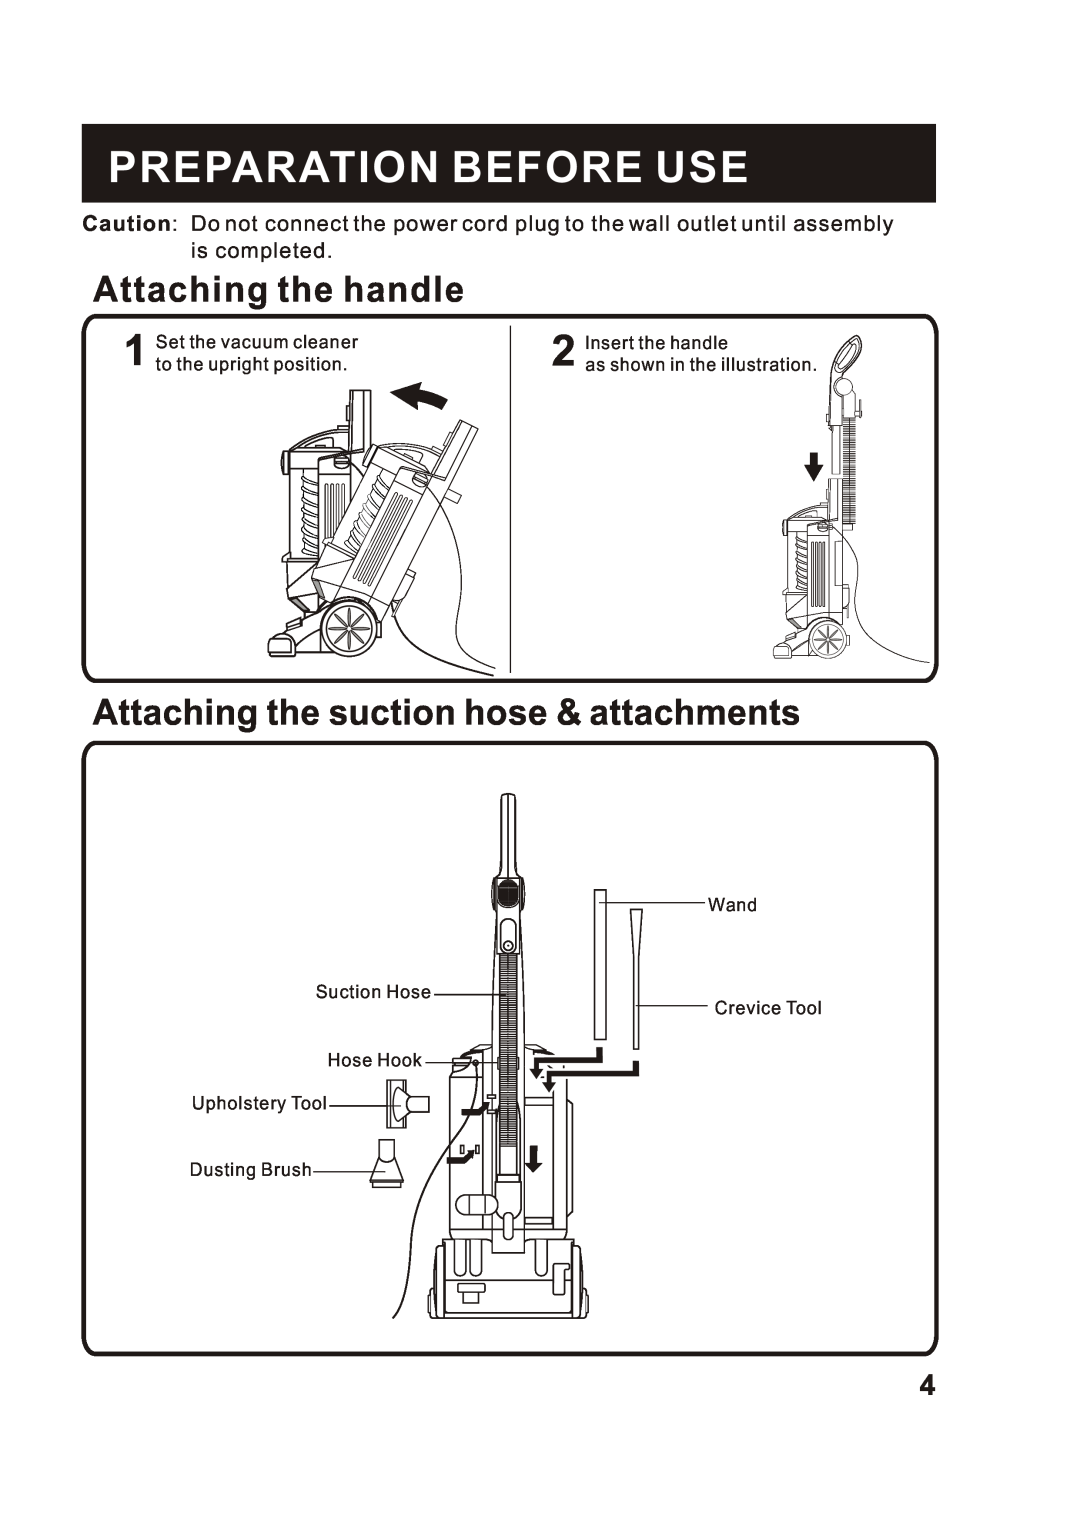 Fantom Vacuum FM760 Preparation Before Use, Attaching the handle, Attaching the suction hose & attachments, is completed 